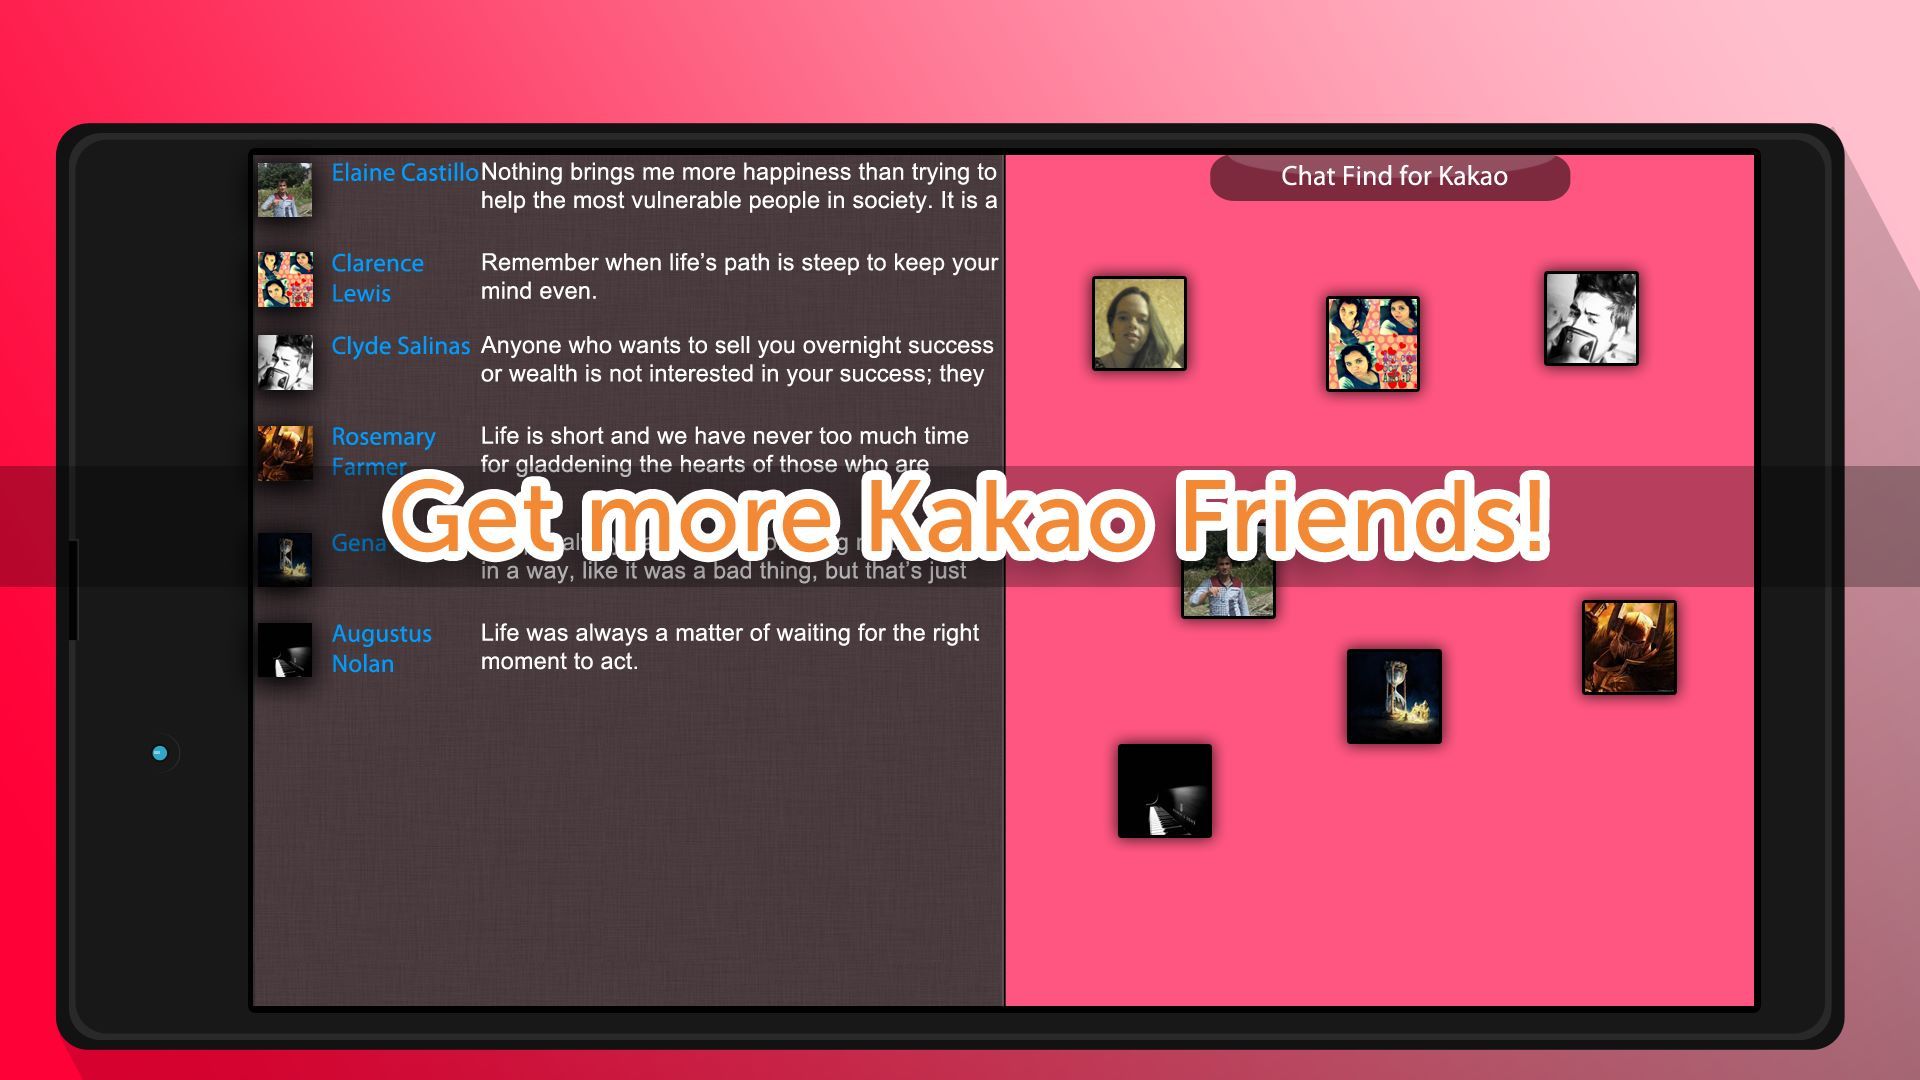 Chat Find for Kakao